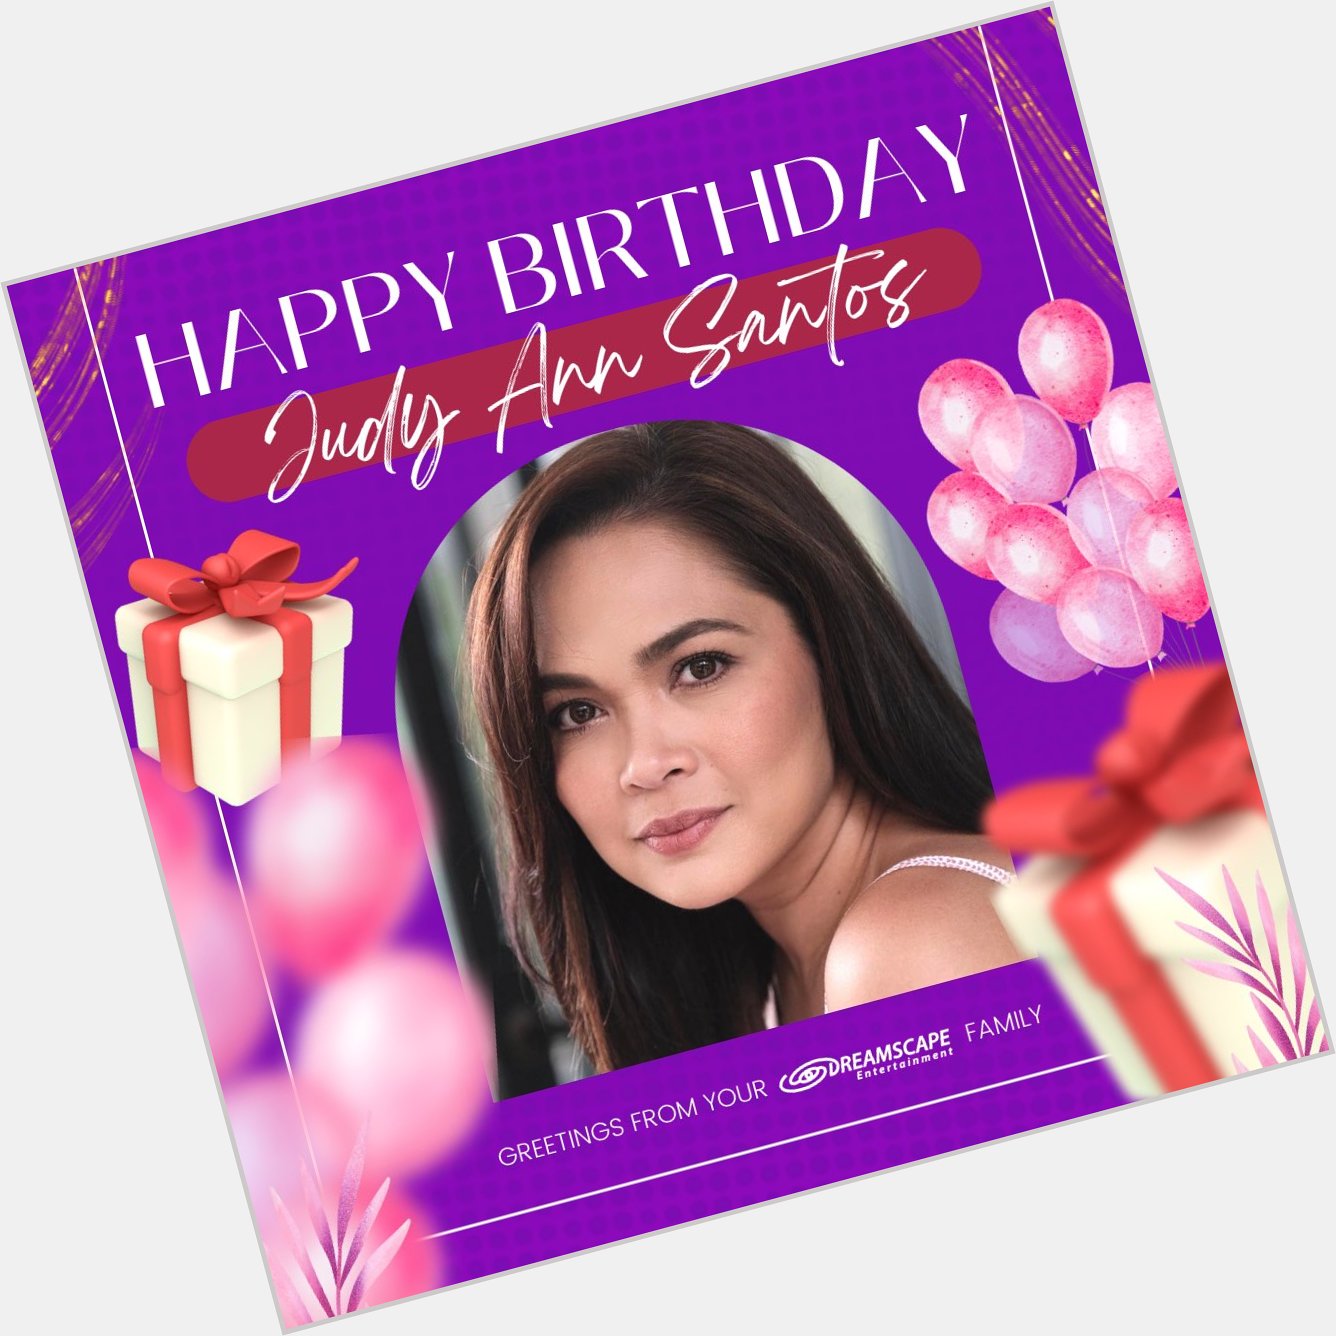 Happy Birthday Judy Ann Santos!  Greetings from your Dreamscape family 